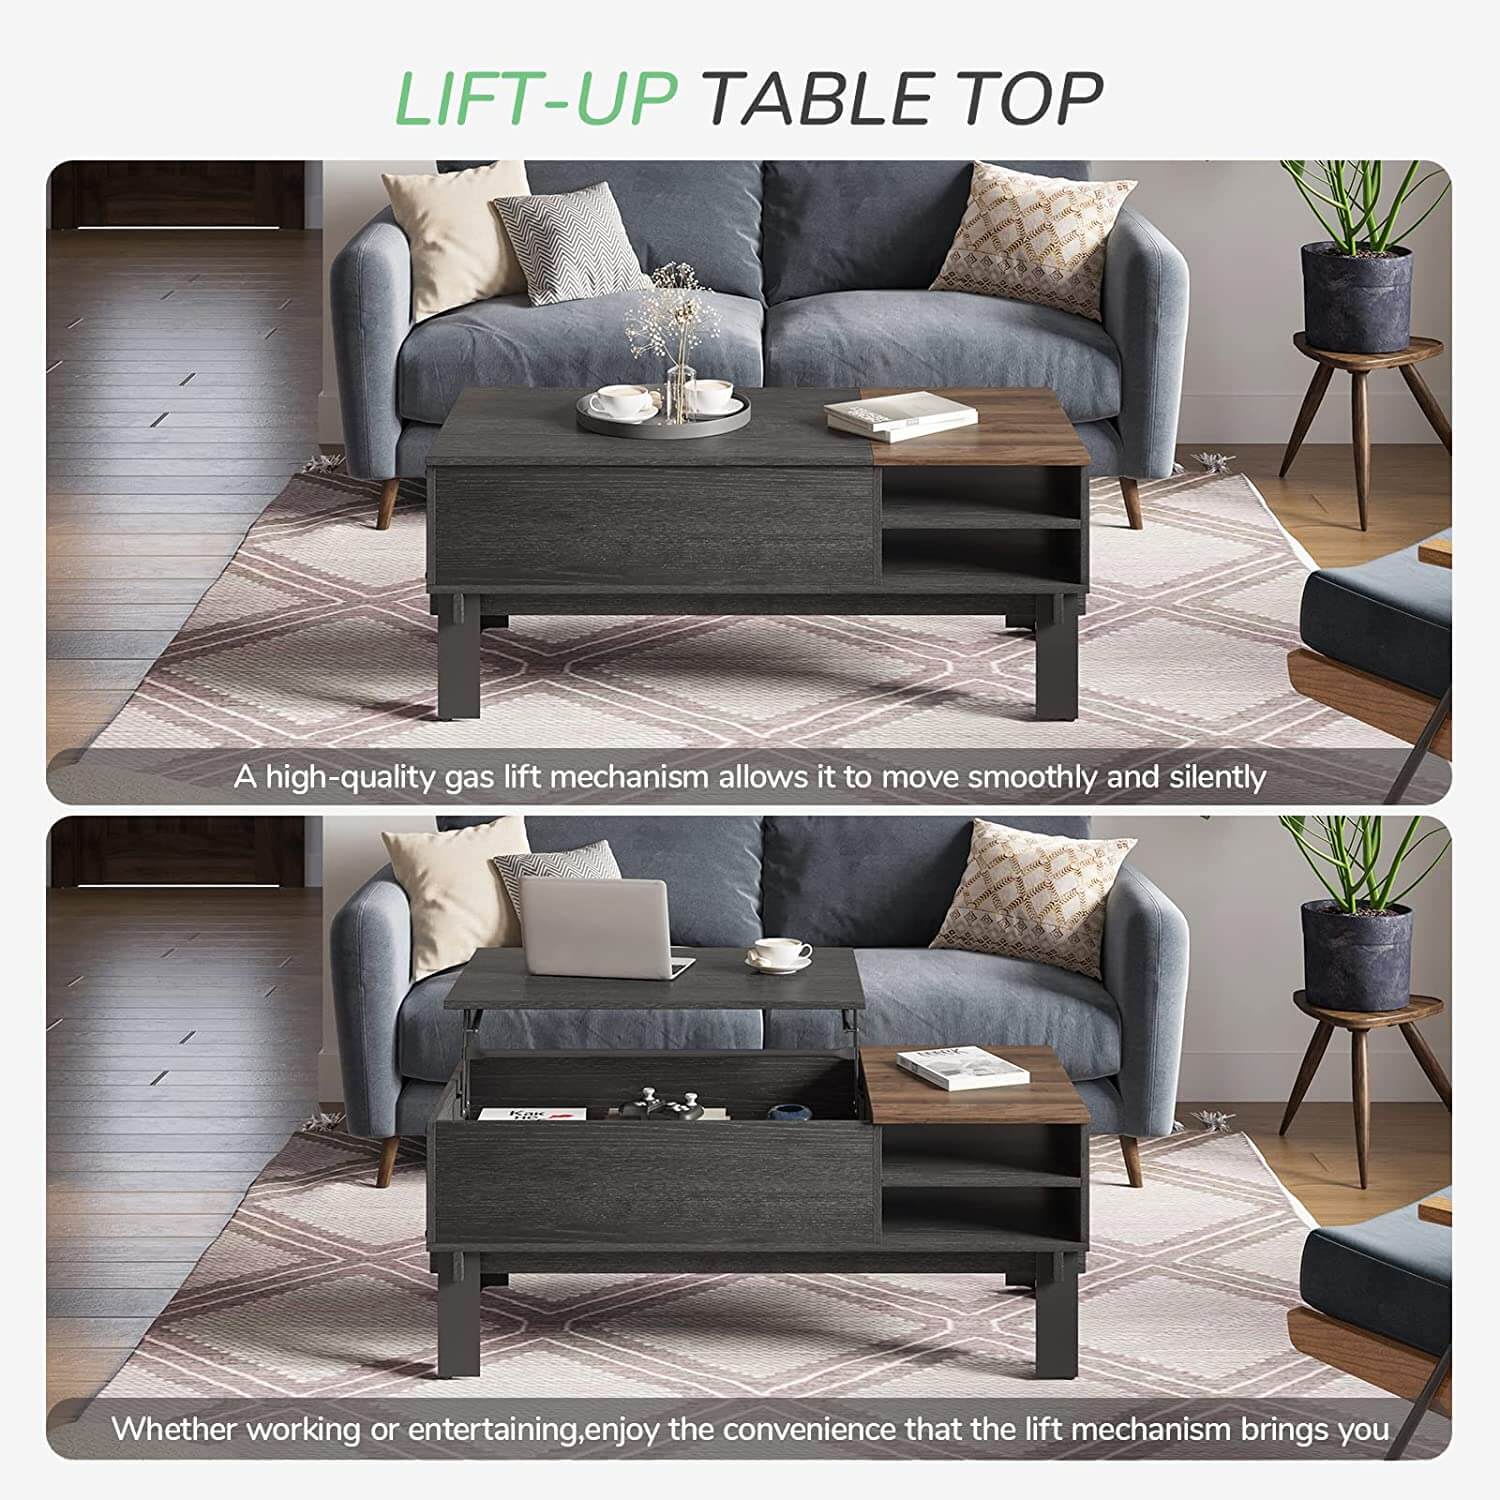 Pop-up Coffee Table with drawers